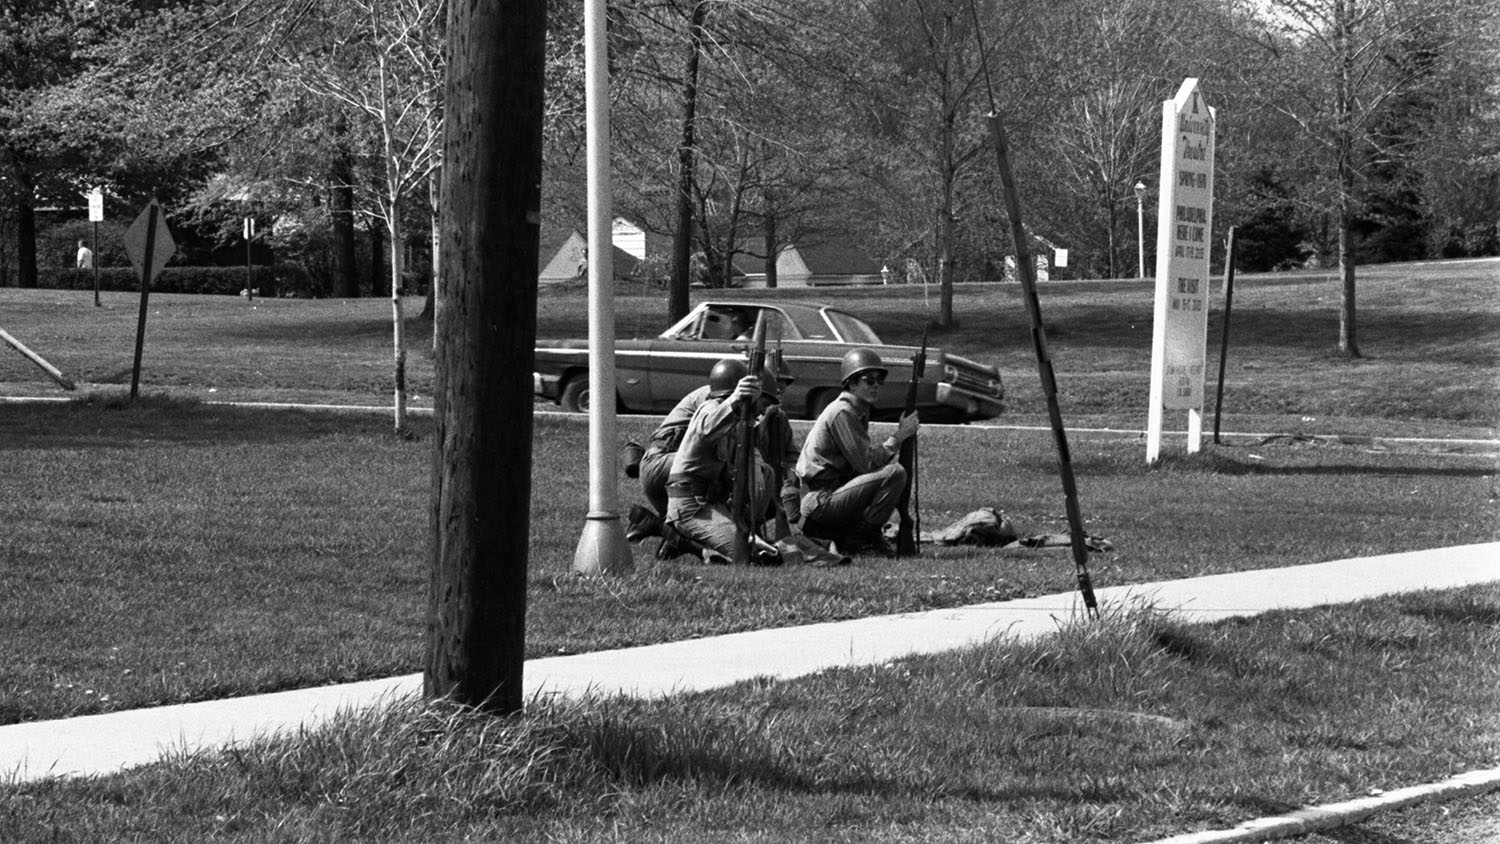 Explore the Kent State Shootings Digital Archive (photo by William A. Fredrick)